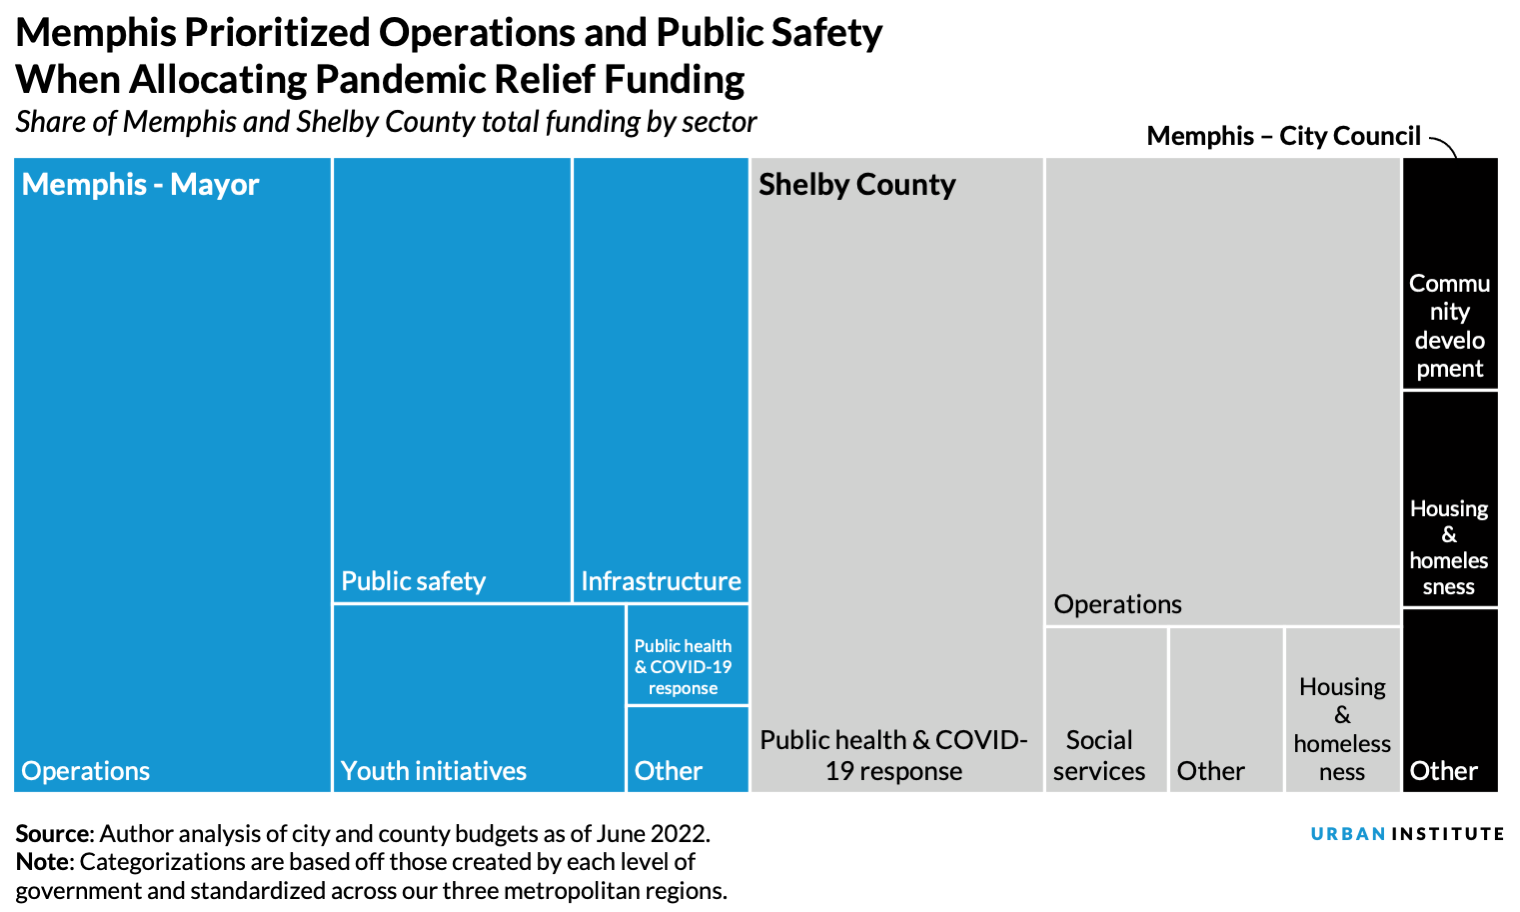 A chart showing the distribution of pandemic relief funding across Memphis and Shelby County, with public health and operations receiving the largest shares. 